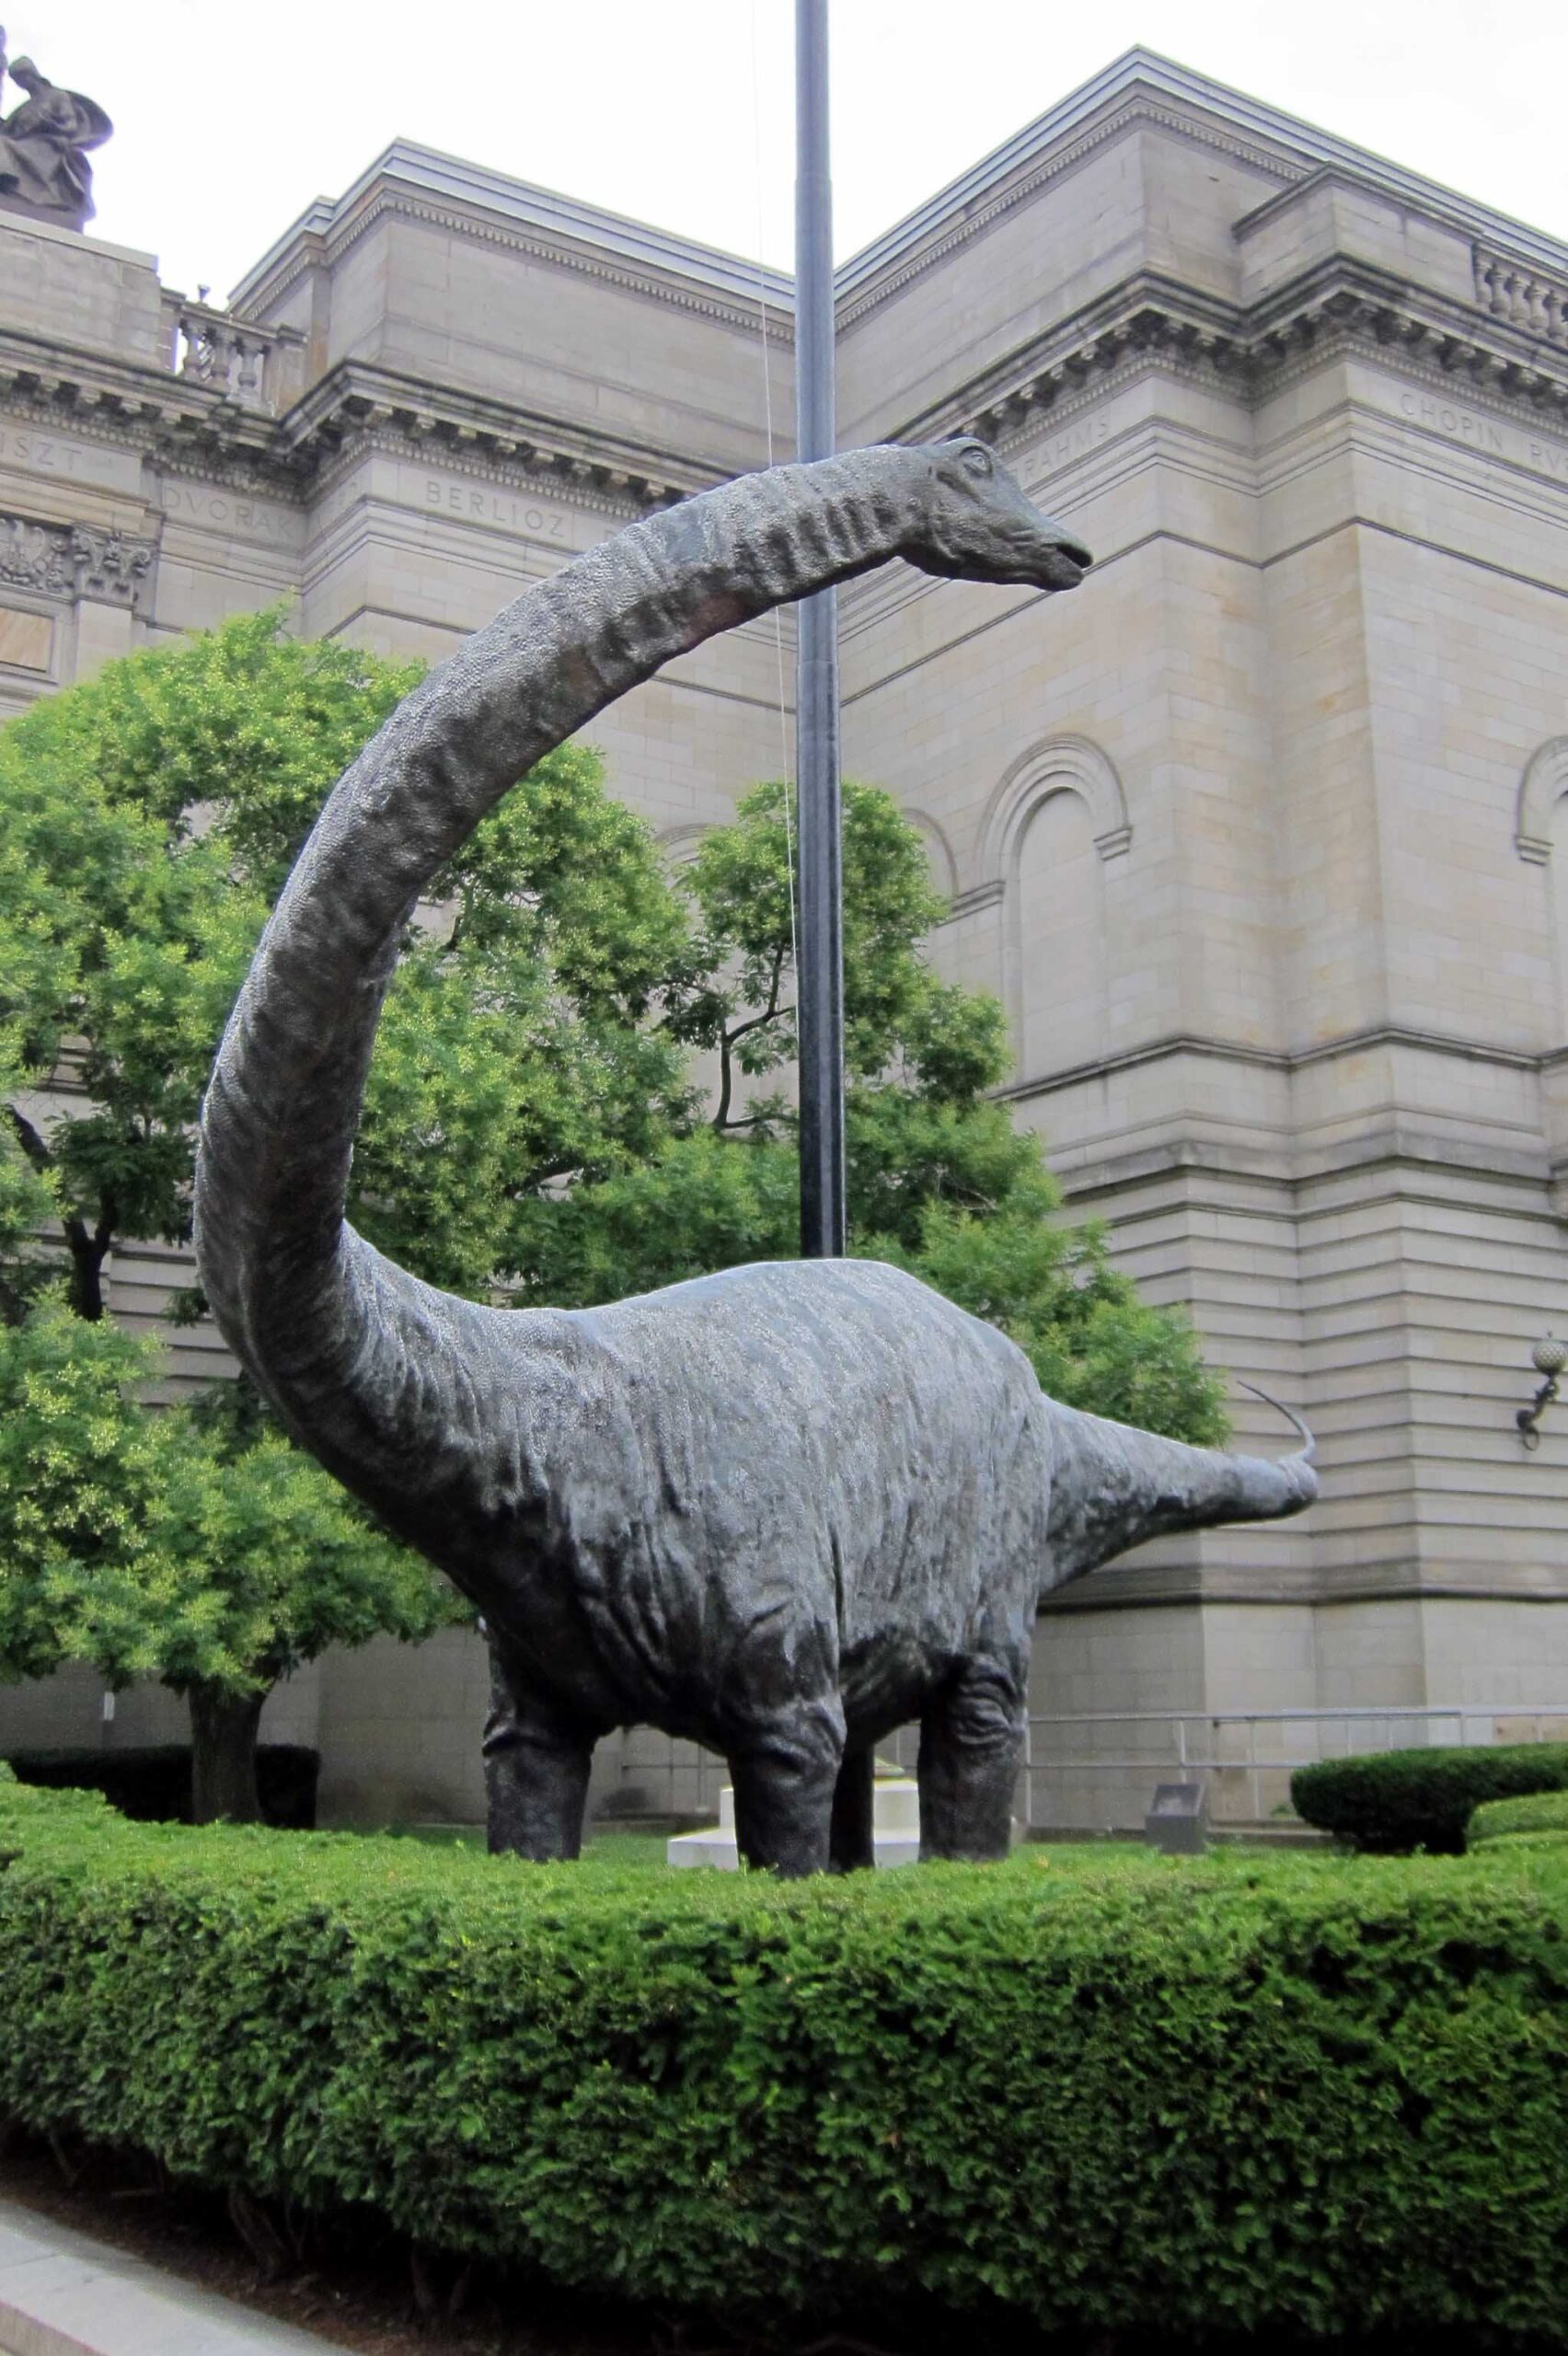 Photo of the Diplodocus dinosaur statue outside of the Carnegie Museum building in Pittsburgh, Pennsylvania.